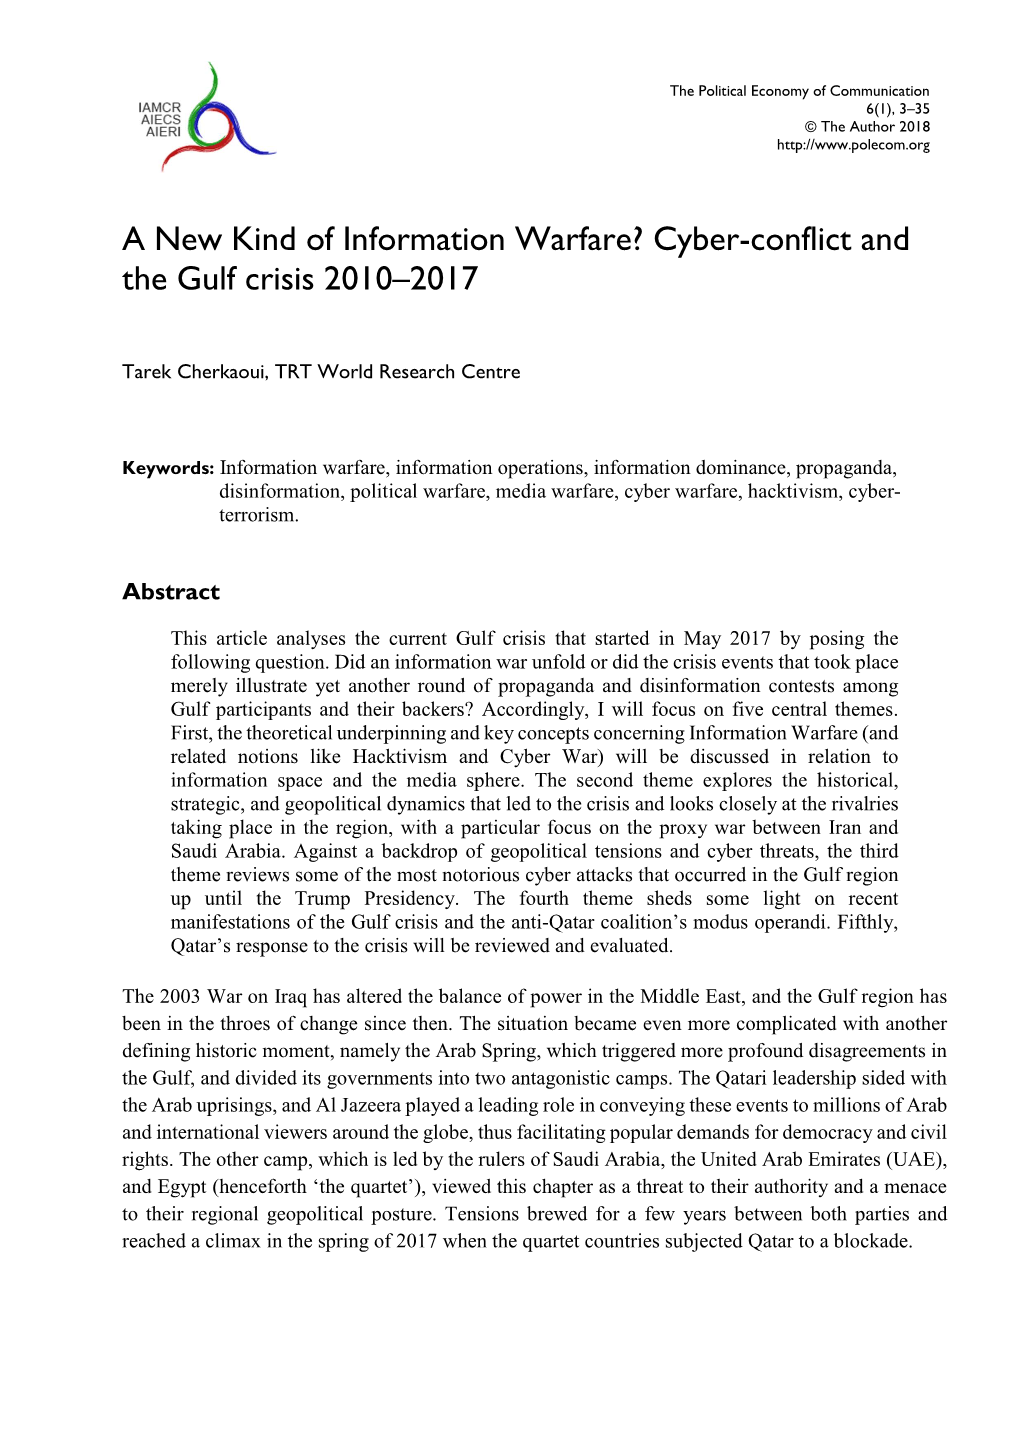 A New Kind of Information Warfare? Cyber-Conflict and the Gulf Crisis 2010–2017